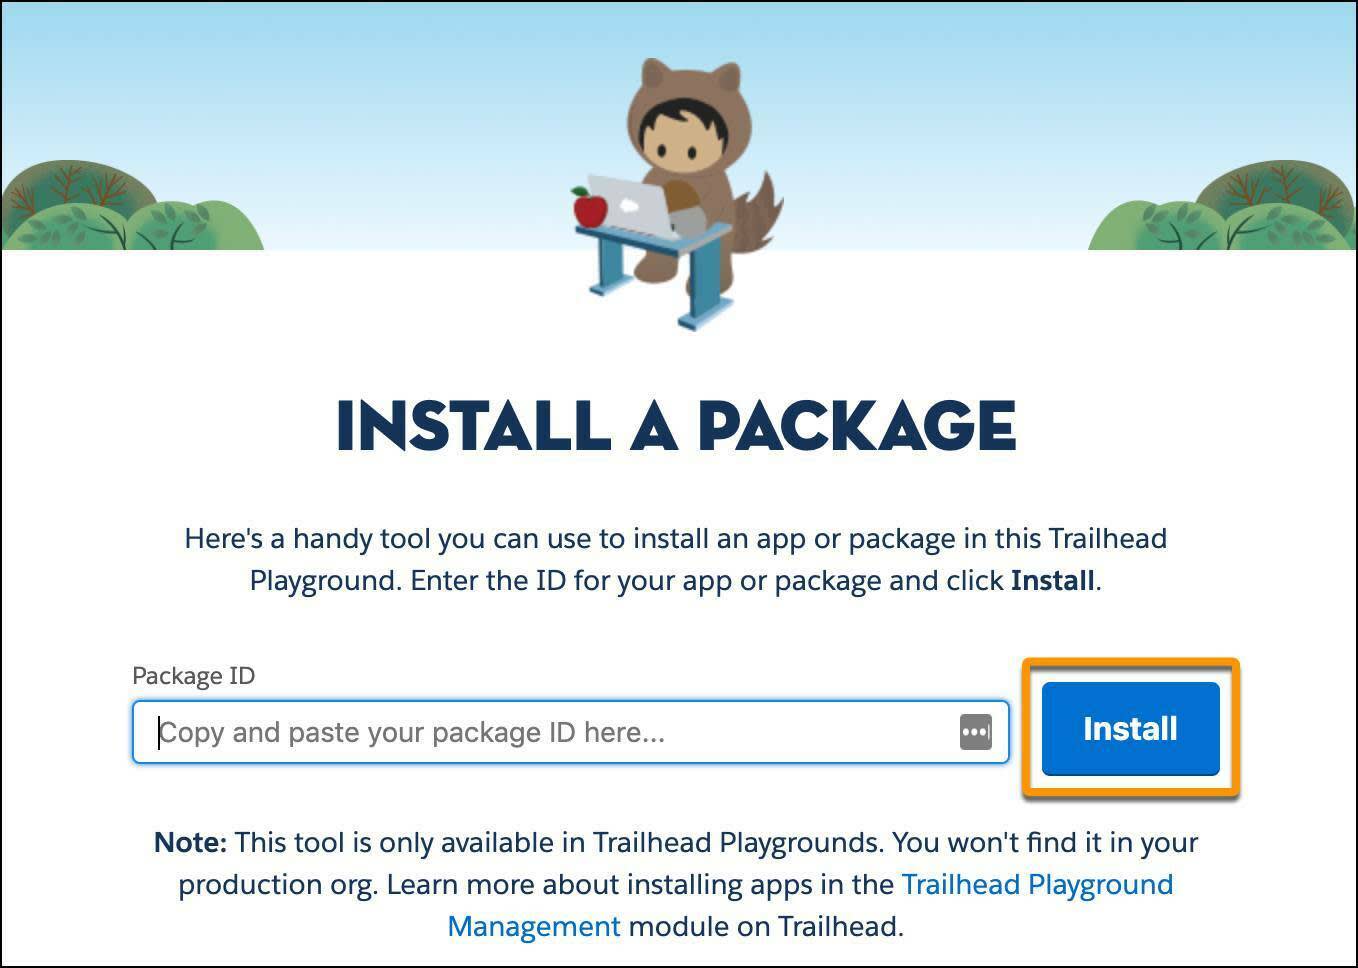 The Install a Package tap in the Trailhead Tips app